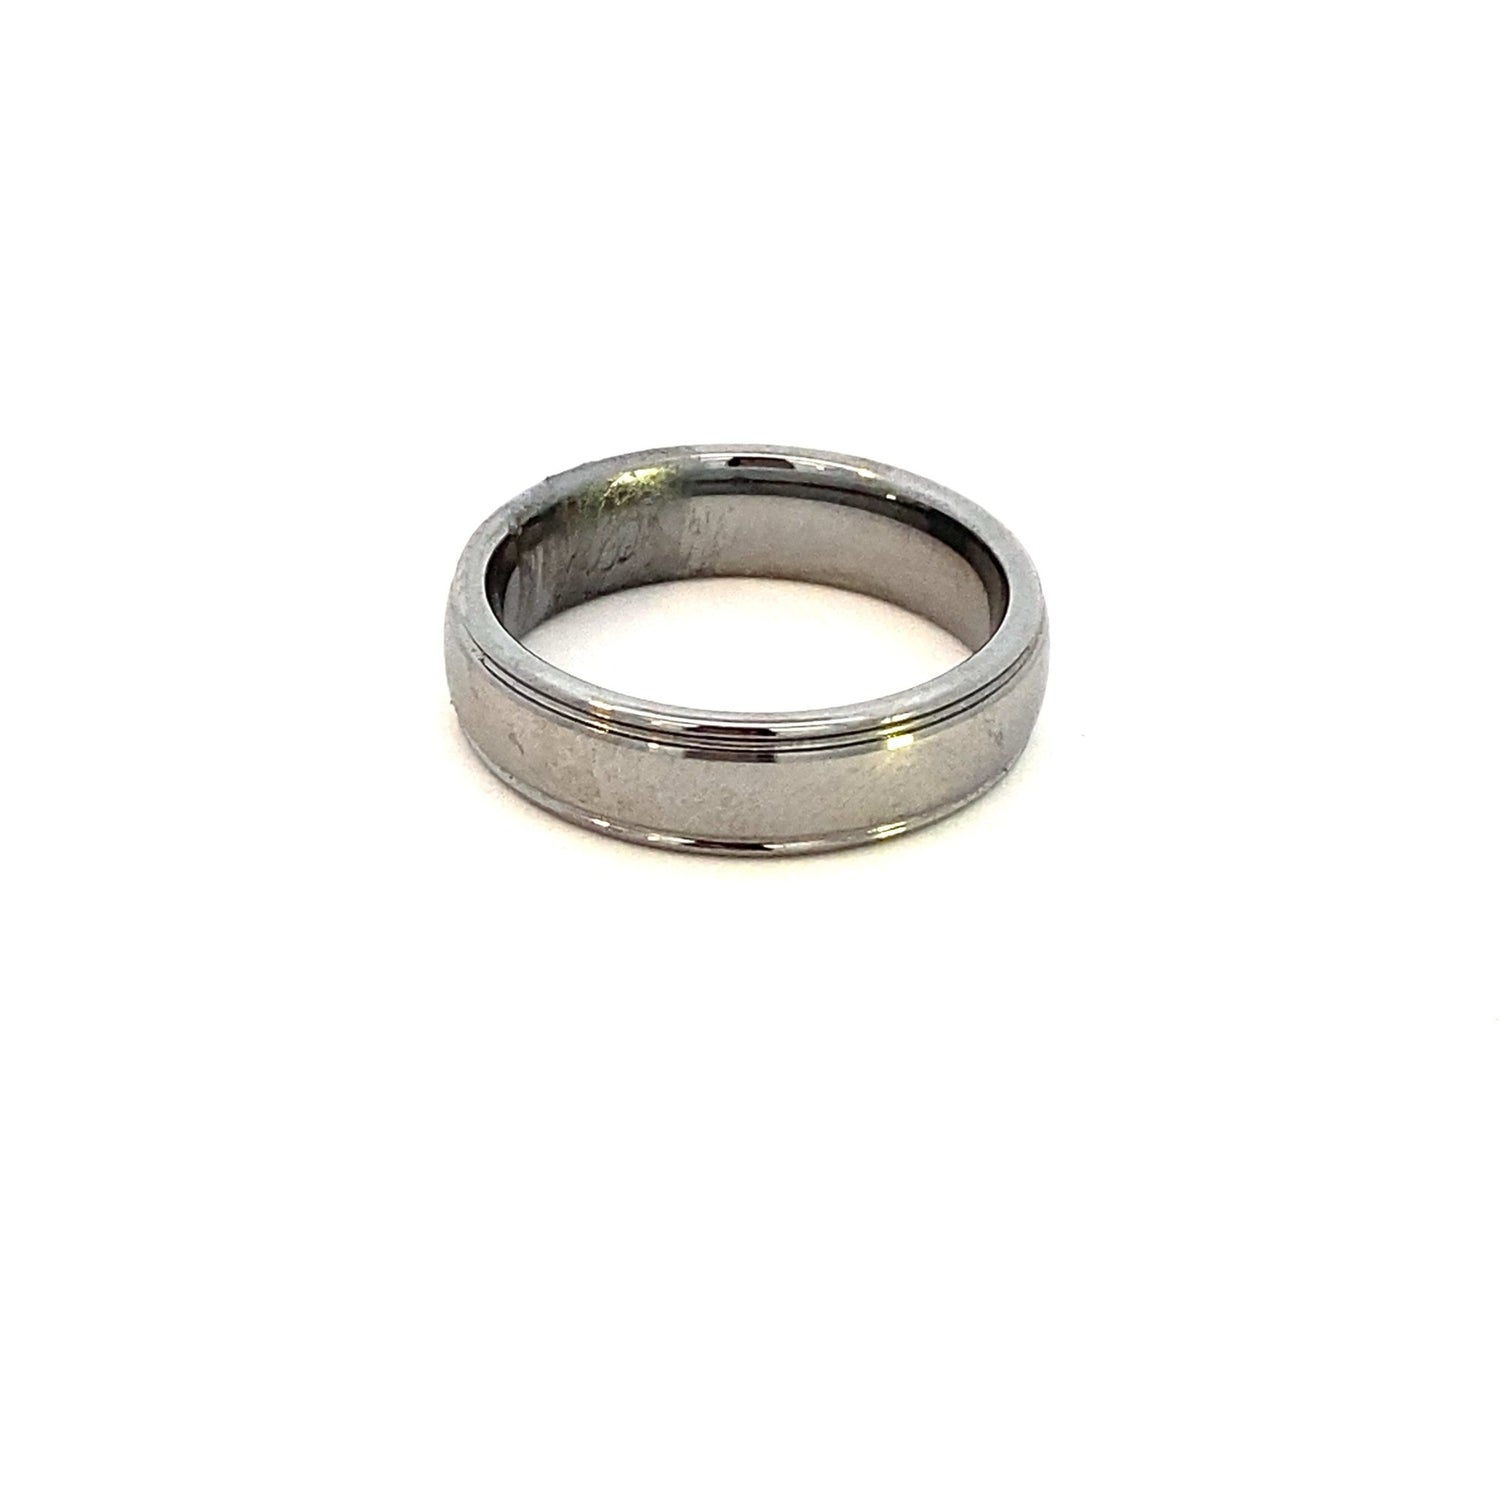 Ring-wed band, tungsten, 6mm - Gaines Jewelers